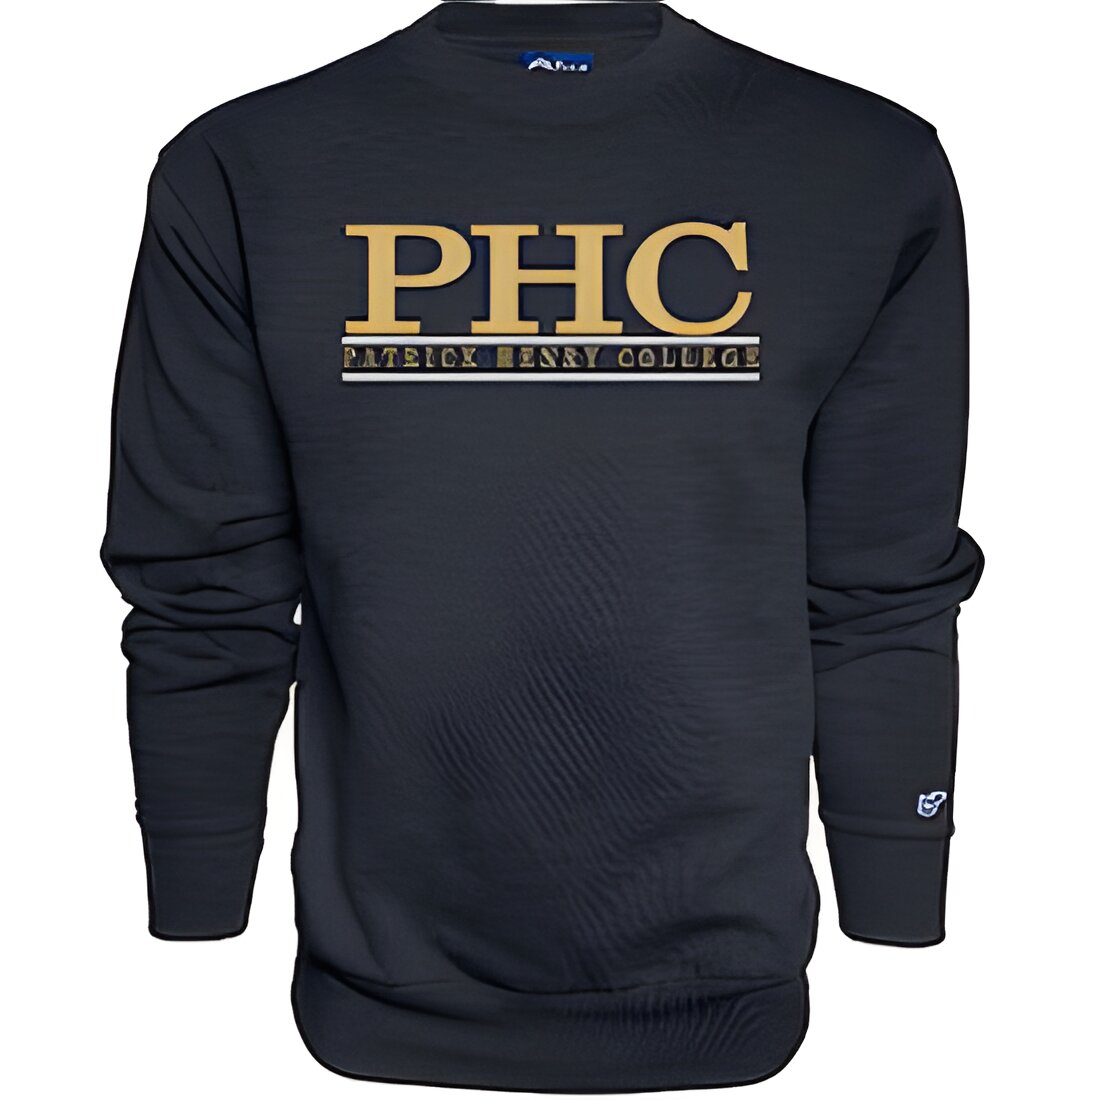 Free Patrick Henry College T-Shirt Or Apparel For Potential Students